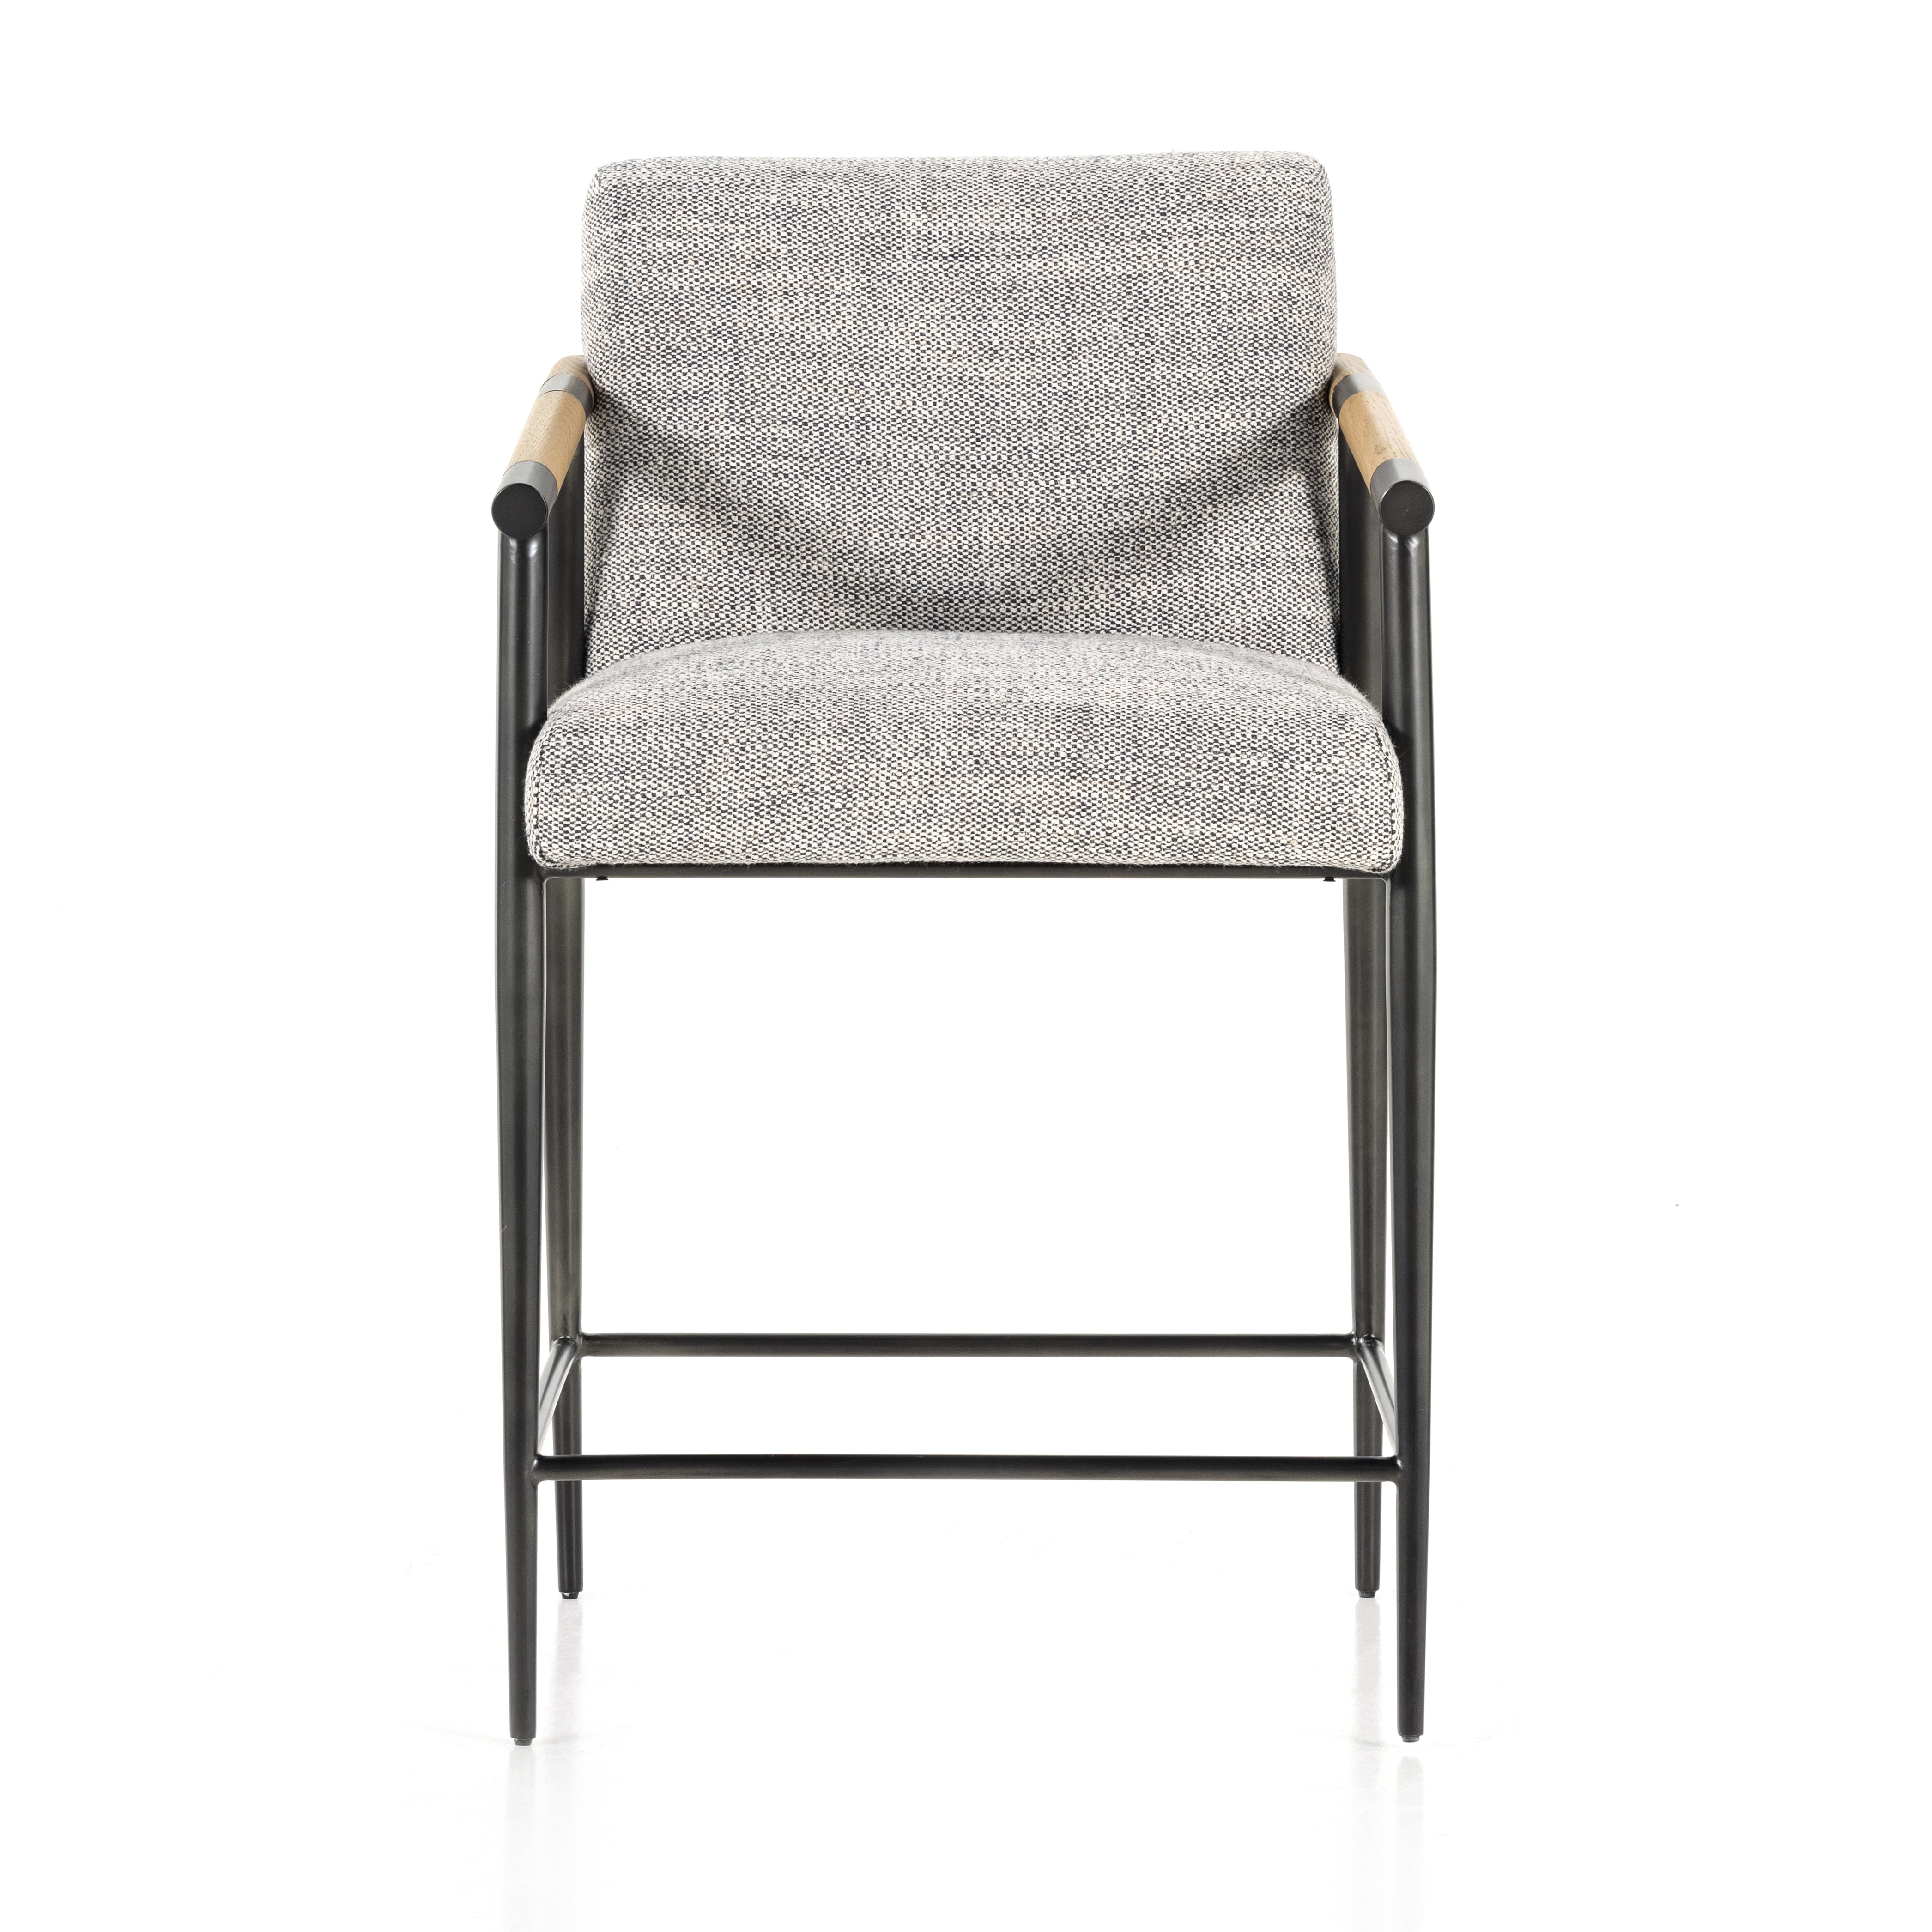 We love the textural grey seating upholstered in a high-performance fabric on this Rowen Bar + Counter Stool - Thames Raven. The angular solid oak arms and black-finished stainless steel framing is perfectly sized to elevate your bar or counter space. 